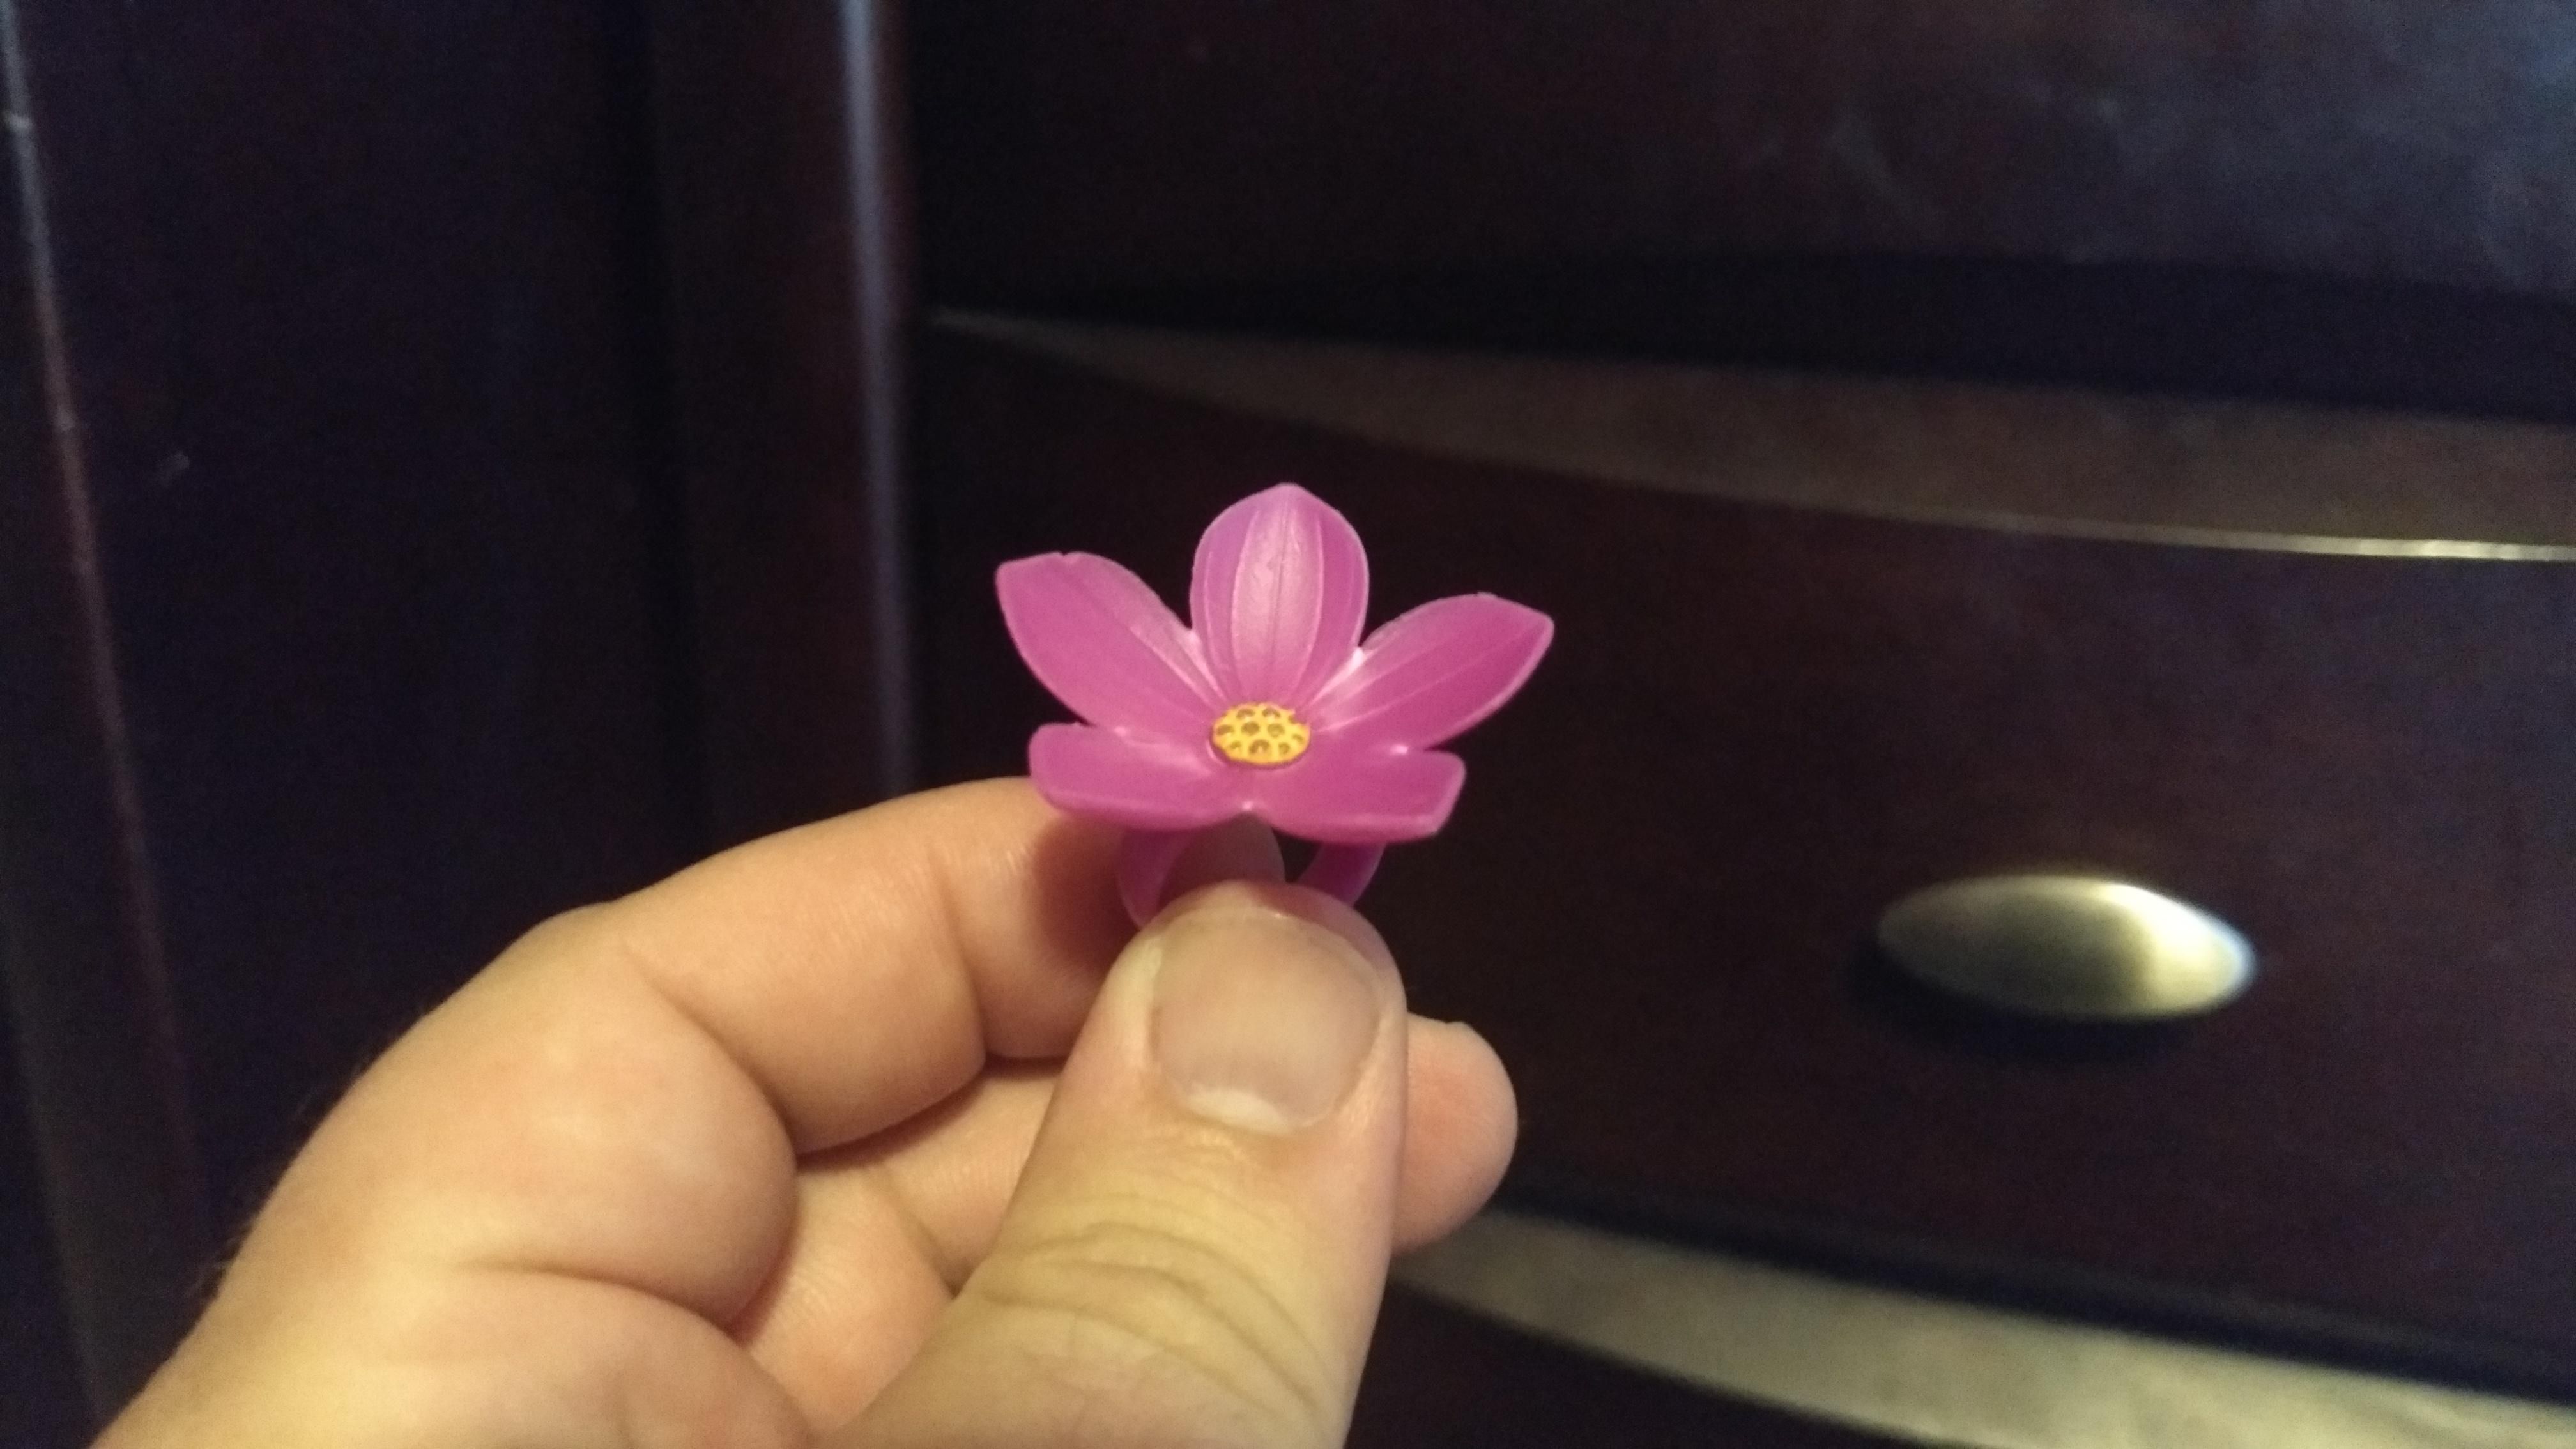 My daughter handed this ring to me today and said, "Take this with you to work so you can look at it all day and remember how much I love...flowers."